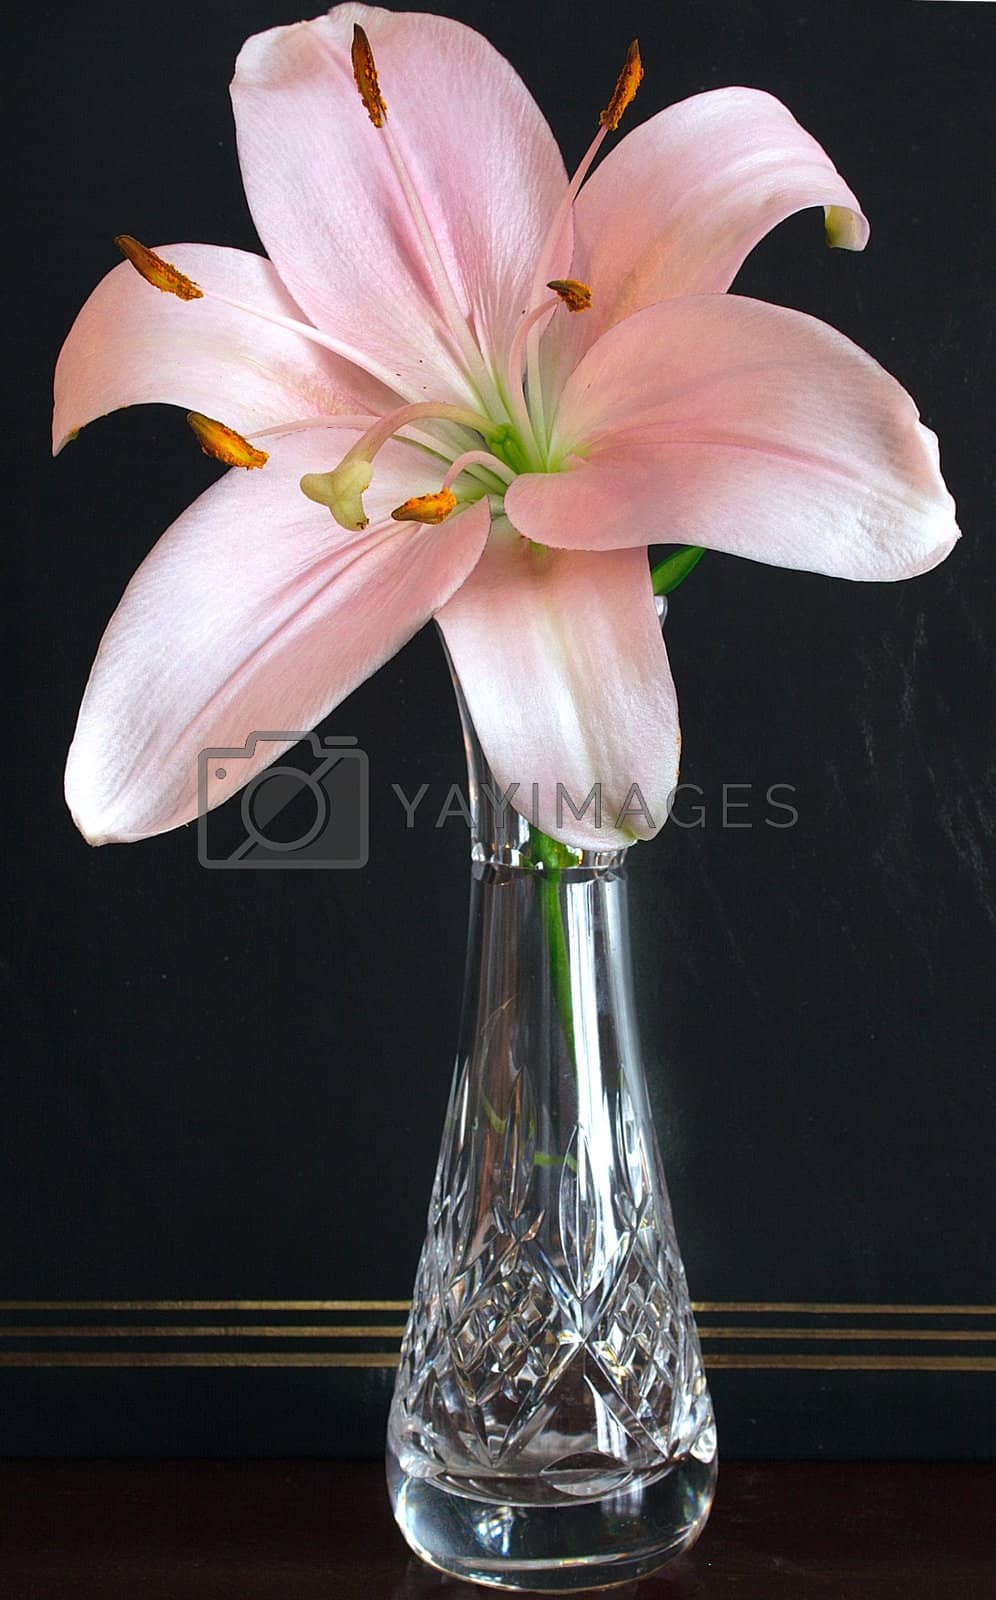 Royalty free image of pink lily by leafy